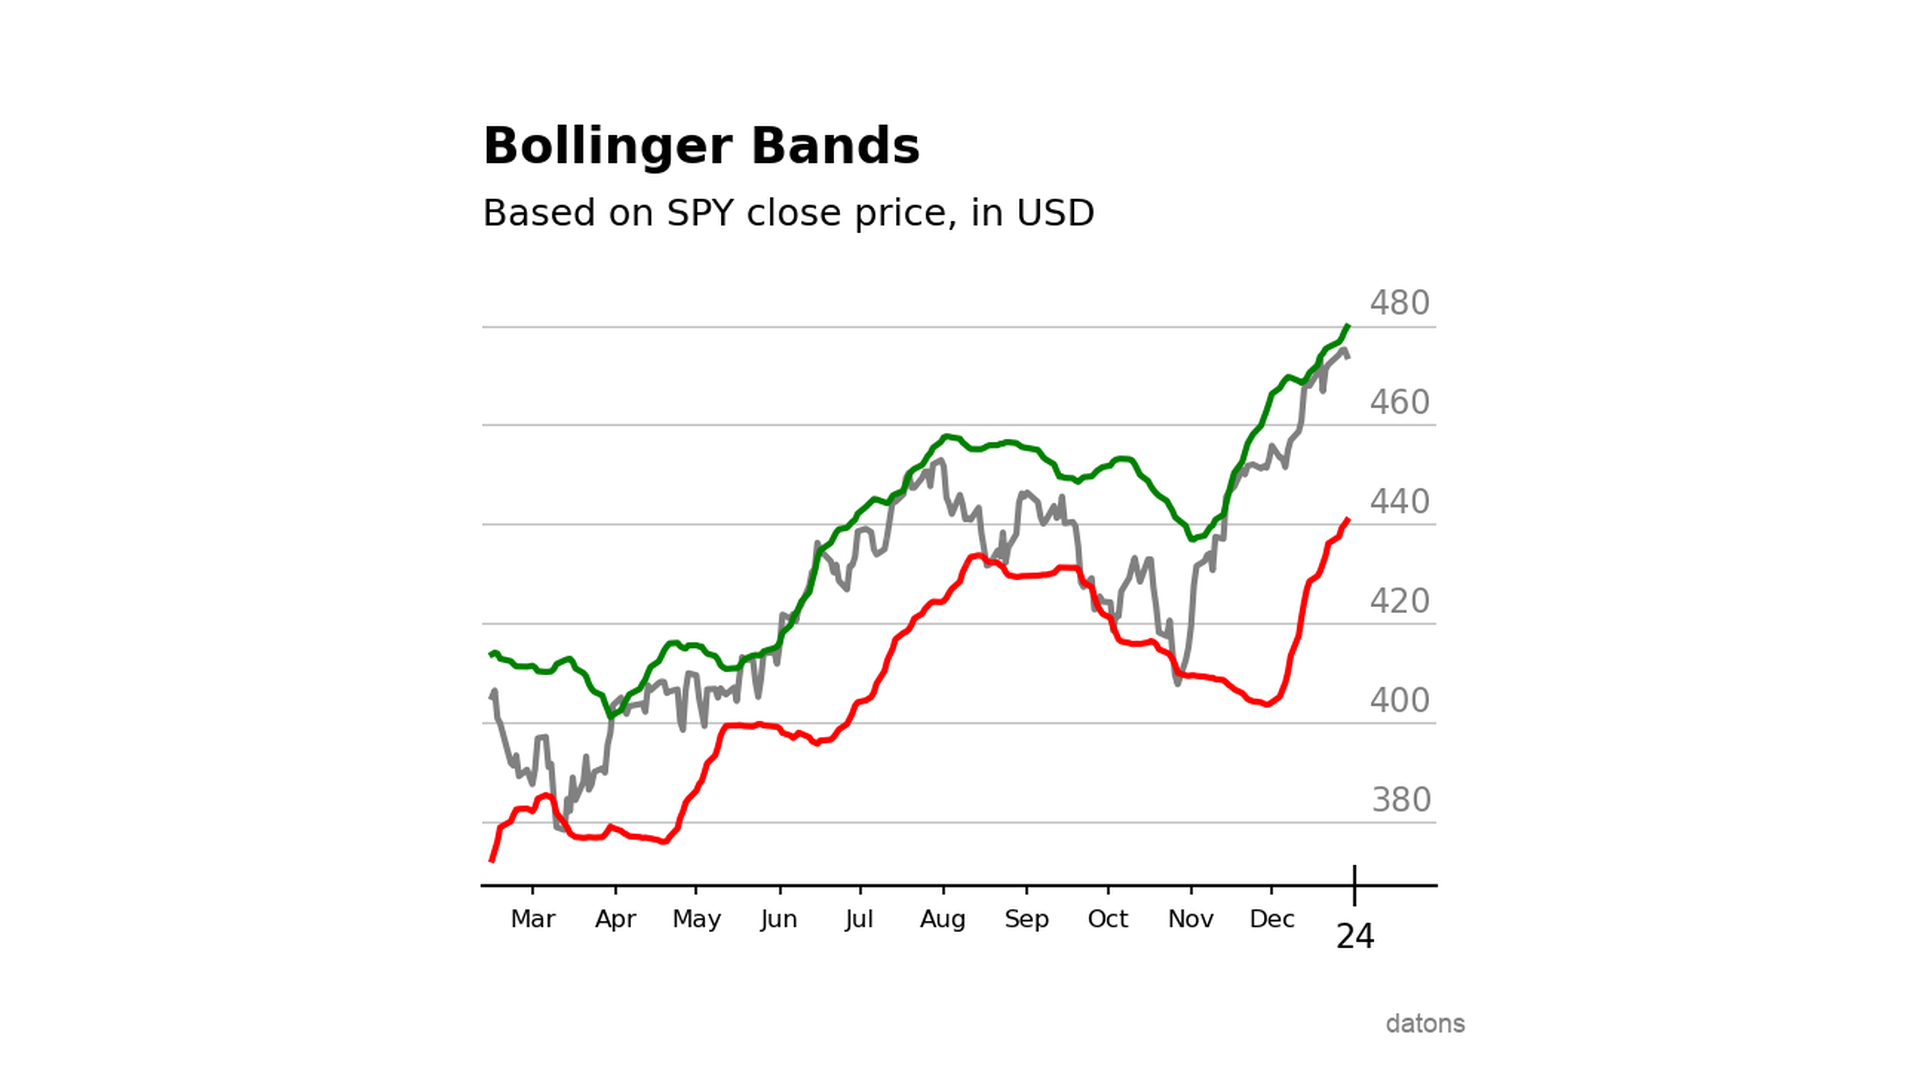 Calculation of Bollinger Bands for the S&P500, showing upper and lower bands